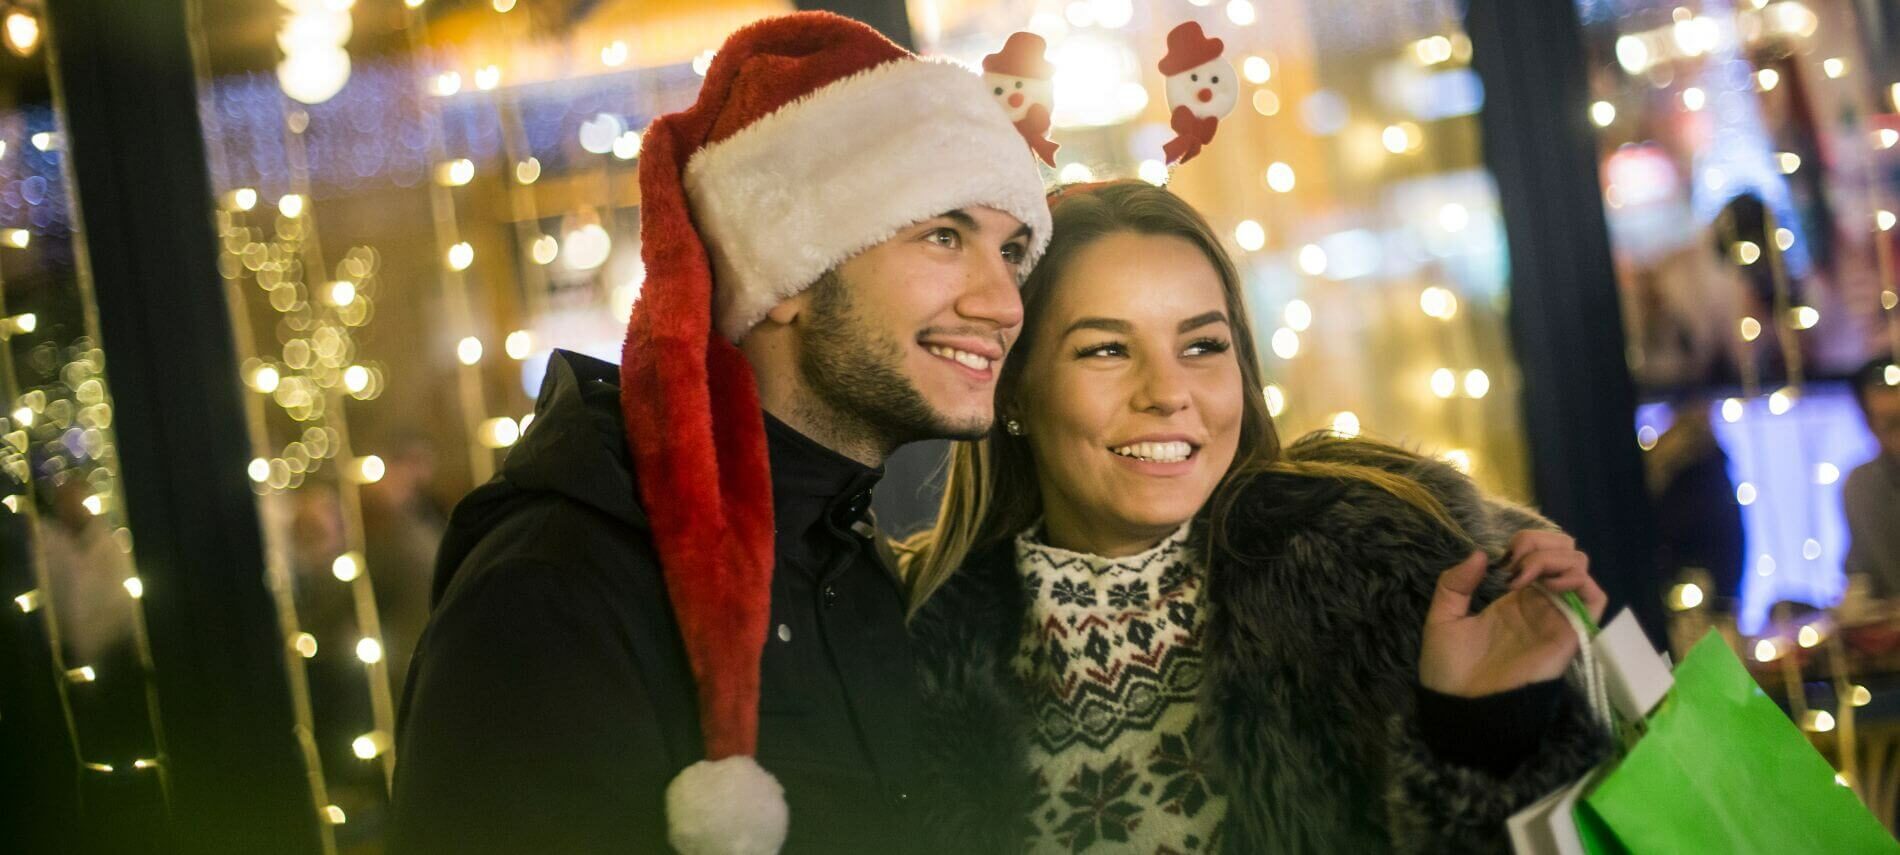 Couple smiling in front of a store’s twinkling lights. Man has Santa hat, and woman has a shopping bag.